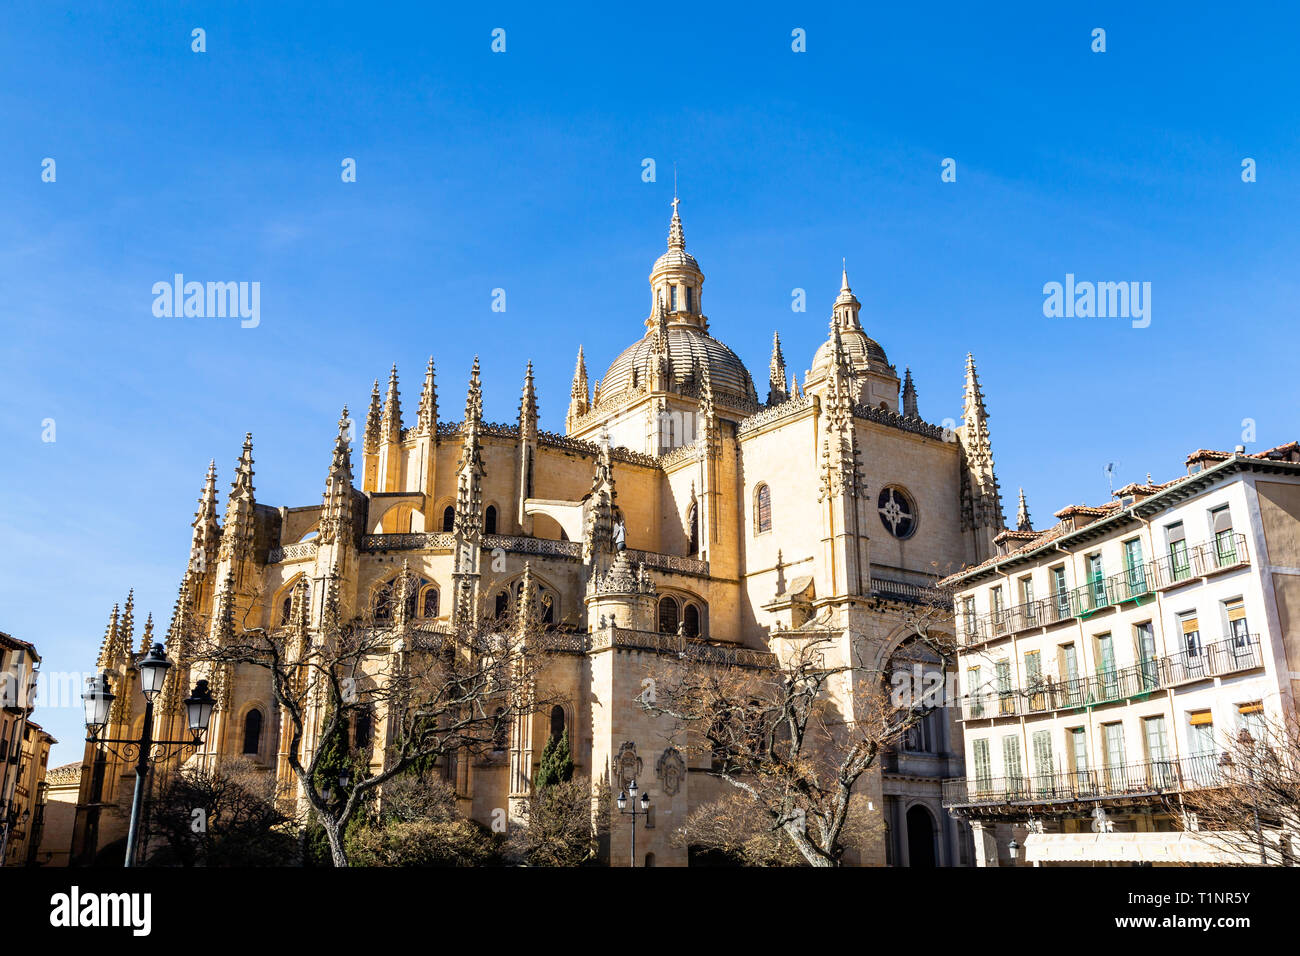 Segovia, Spain: Segovia cathedral in a winter day seen from plaza Mayor. It was the last gothic style cathedral built in Spain, during the sixteenth c Stock Photo